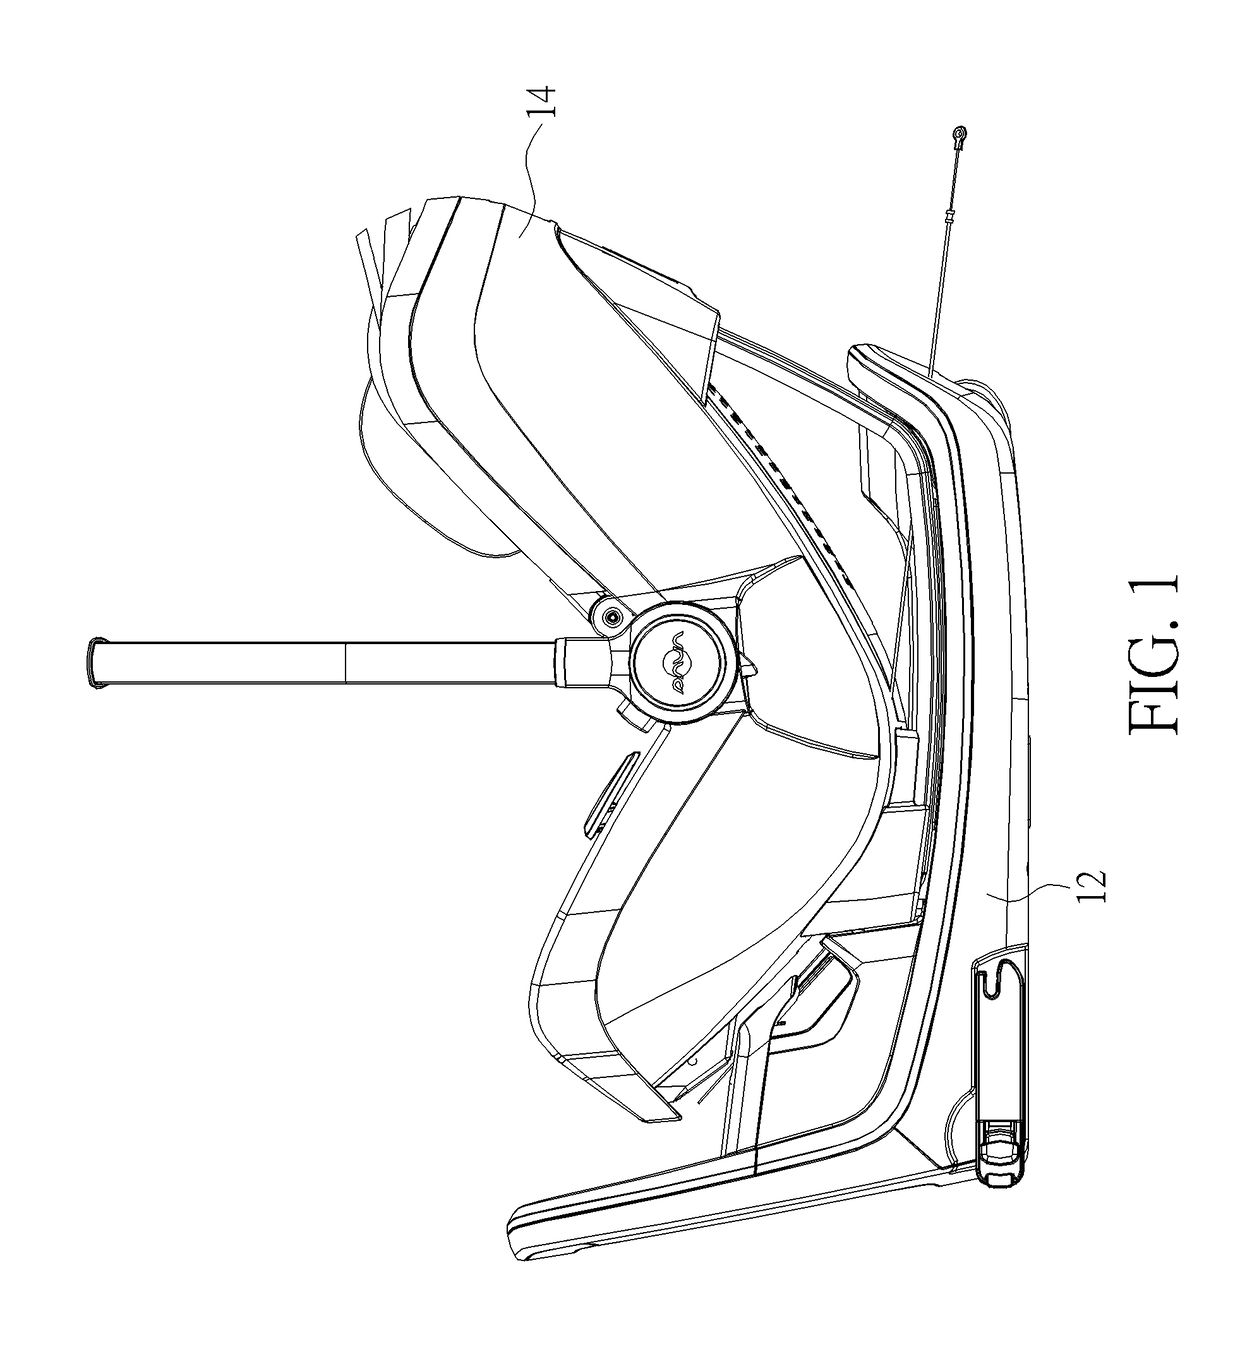 Safety belt assembling device capable of assembling a child restraint system with a vehicle seat